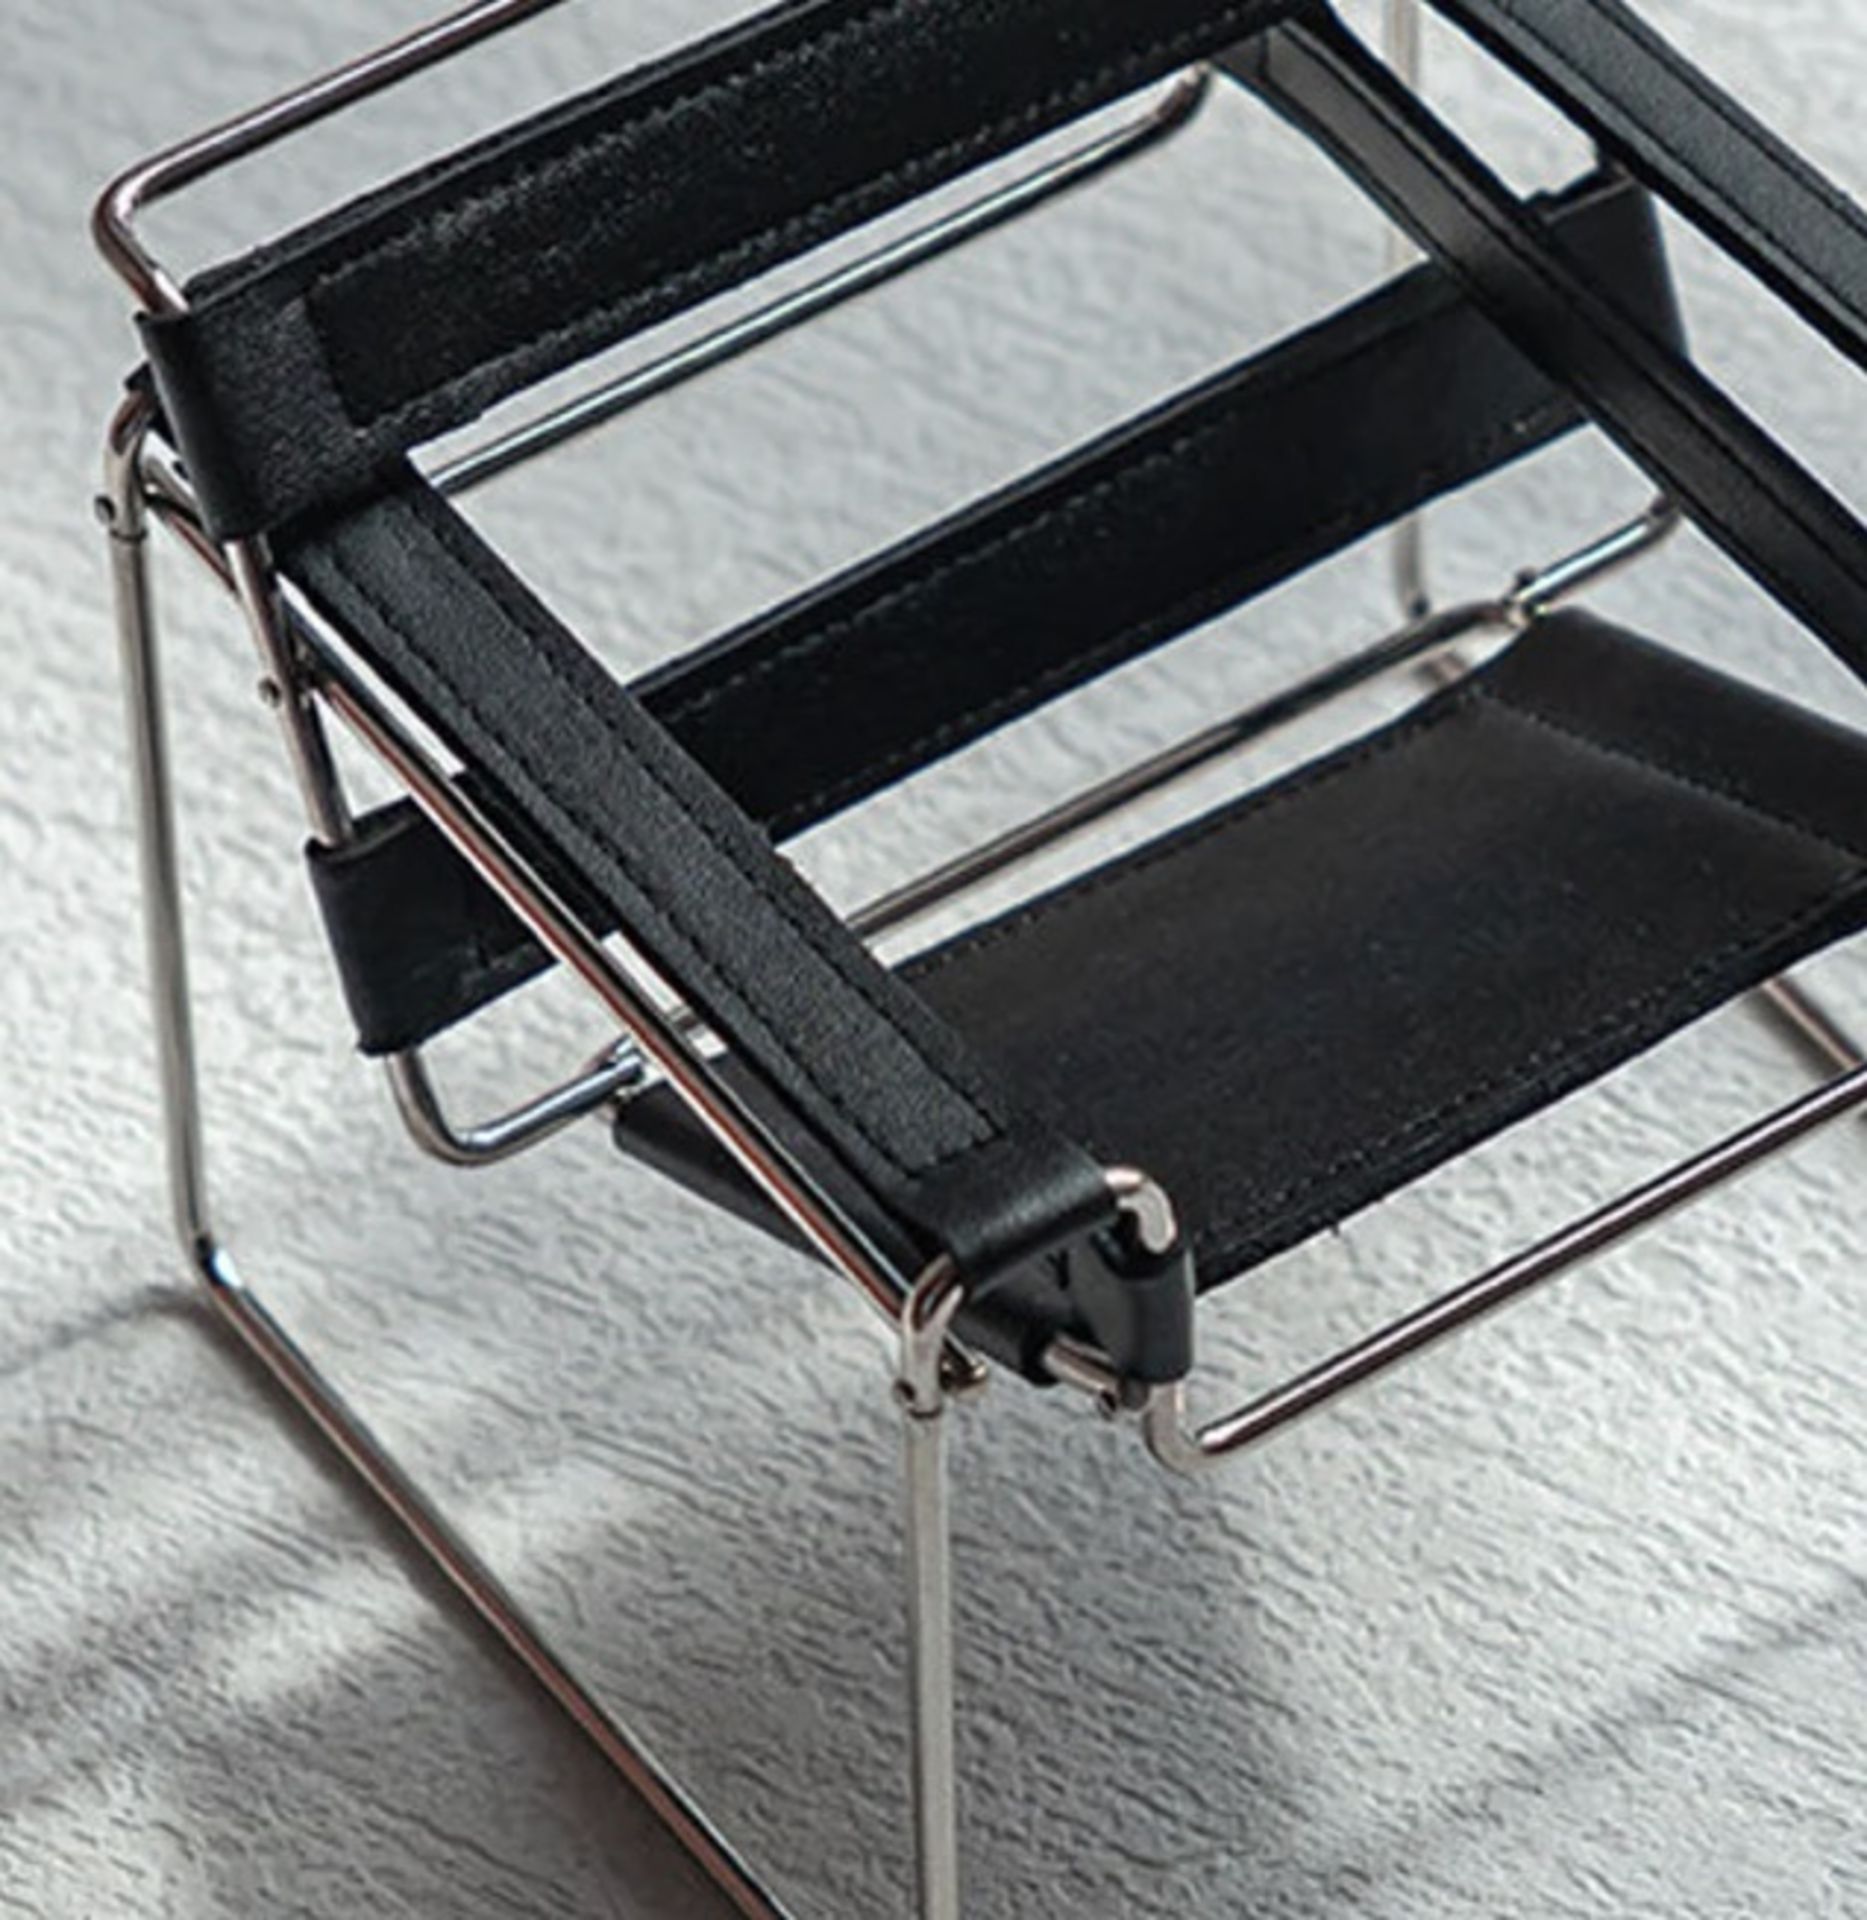 Wassily Chair (B3 Chair) 1/6 Scale Model Desk Display - Image 5 of 5